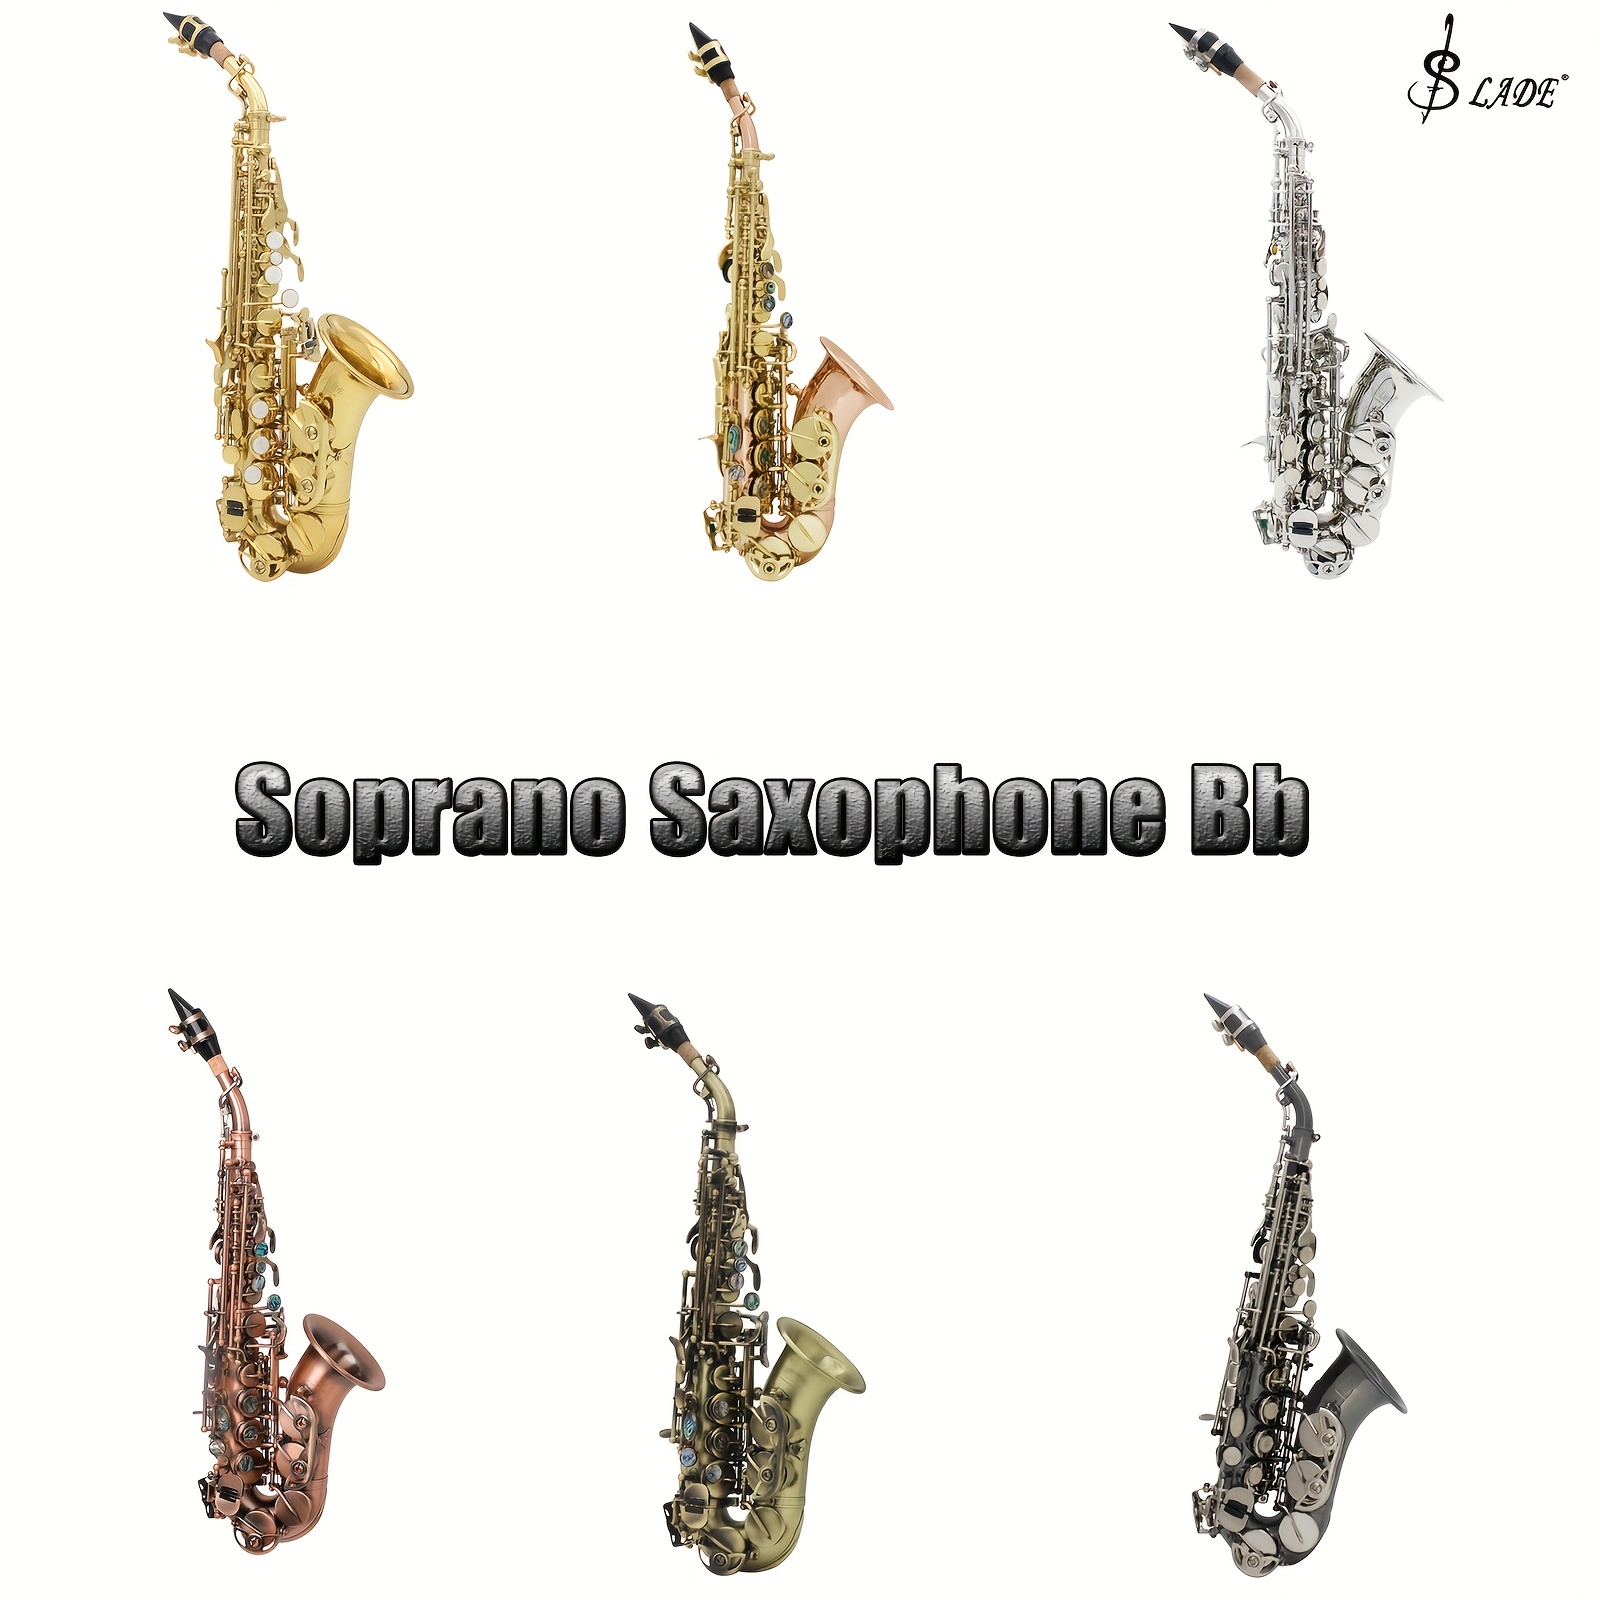 8-Hole C Key Simple Mini Pocket Saxophone With Mouthpieces Reeds Portable  Beginner Alto Flute Head Treble Straight Tube Musical Instrument